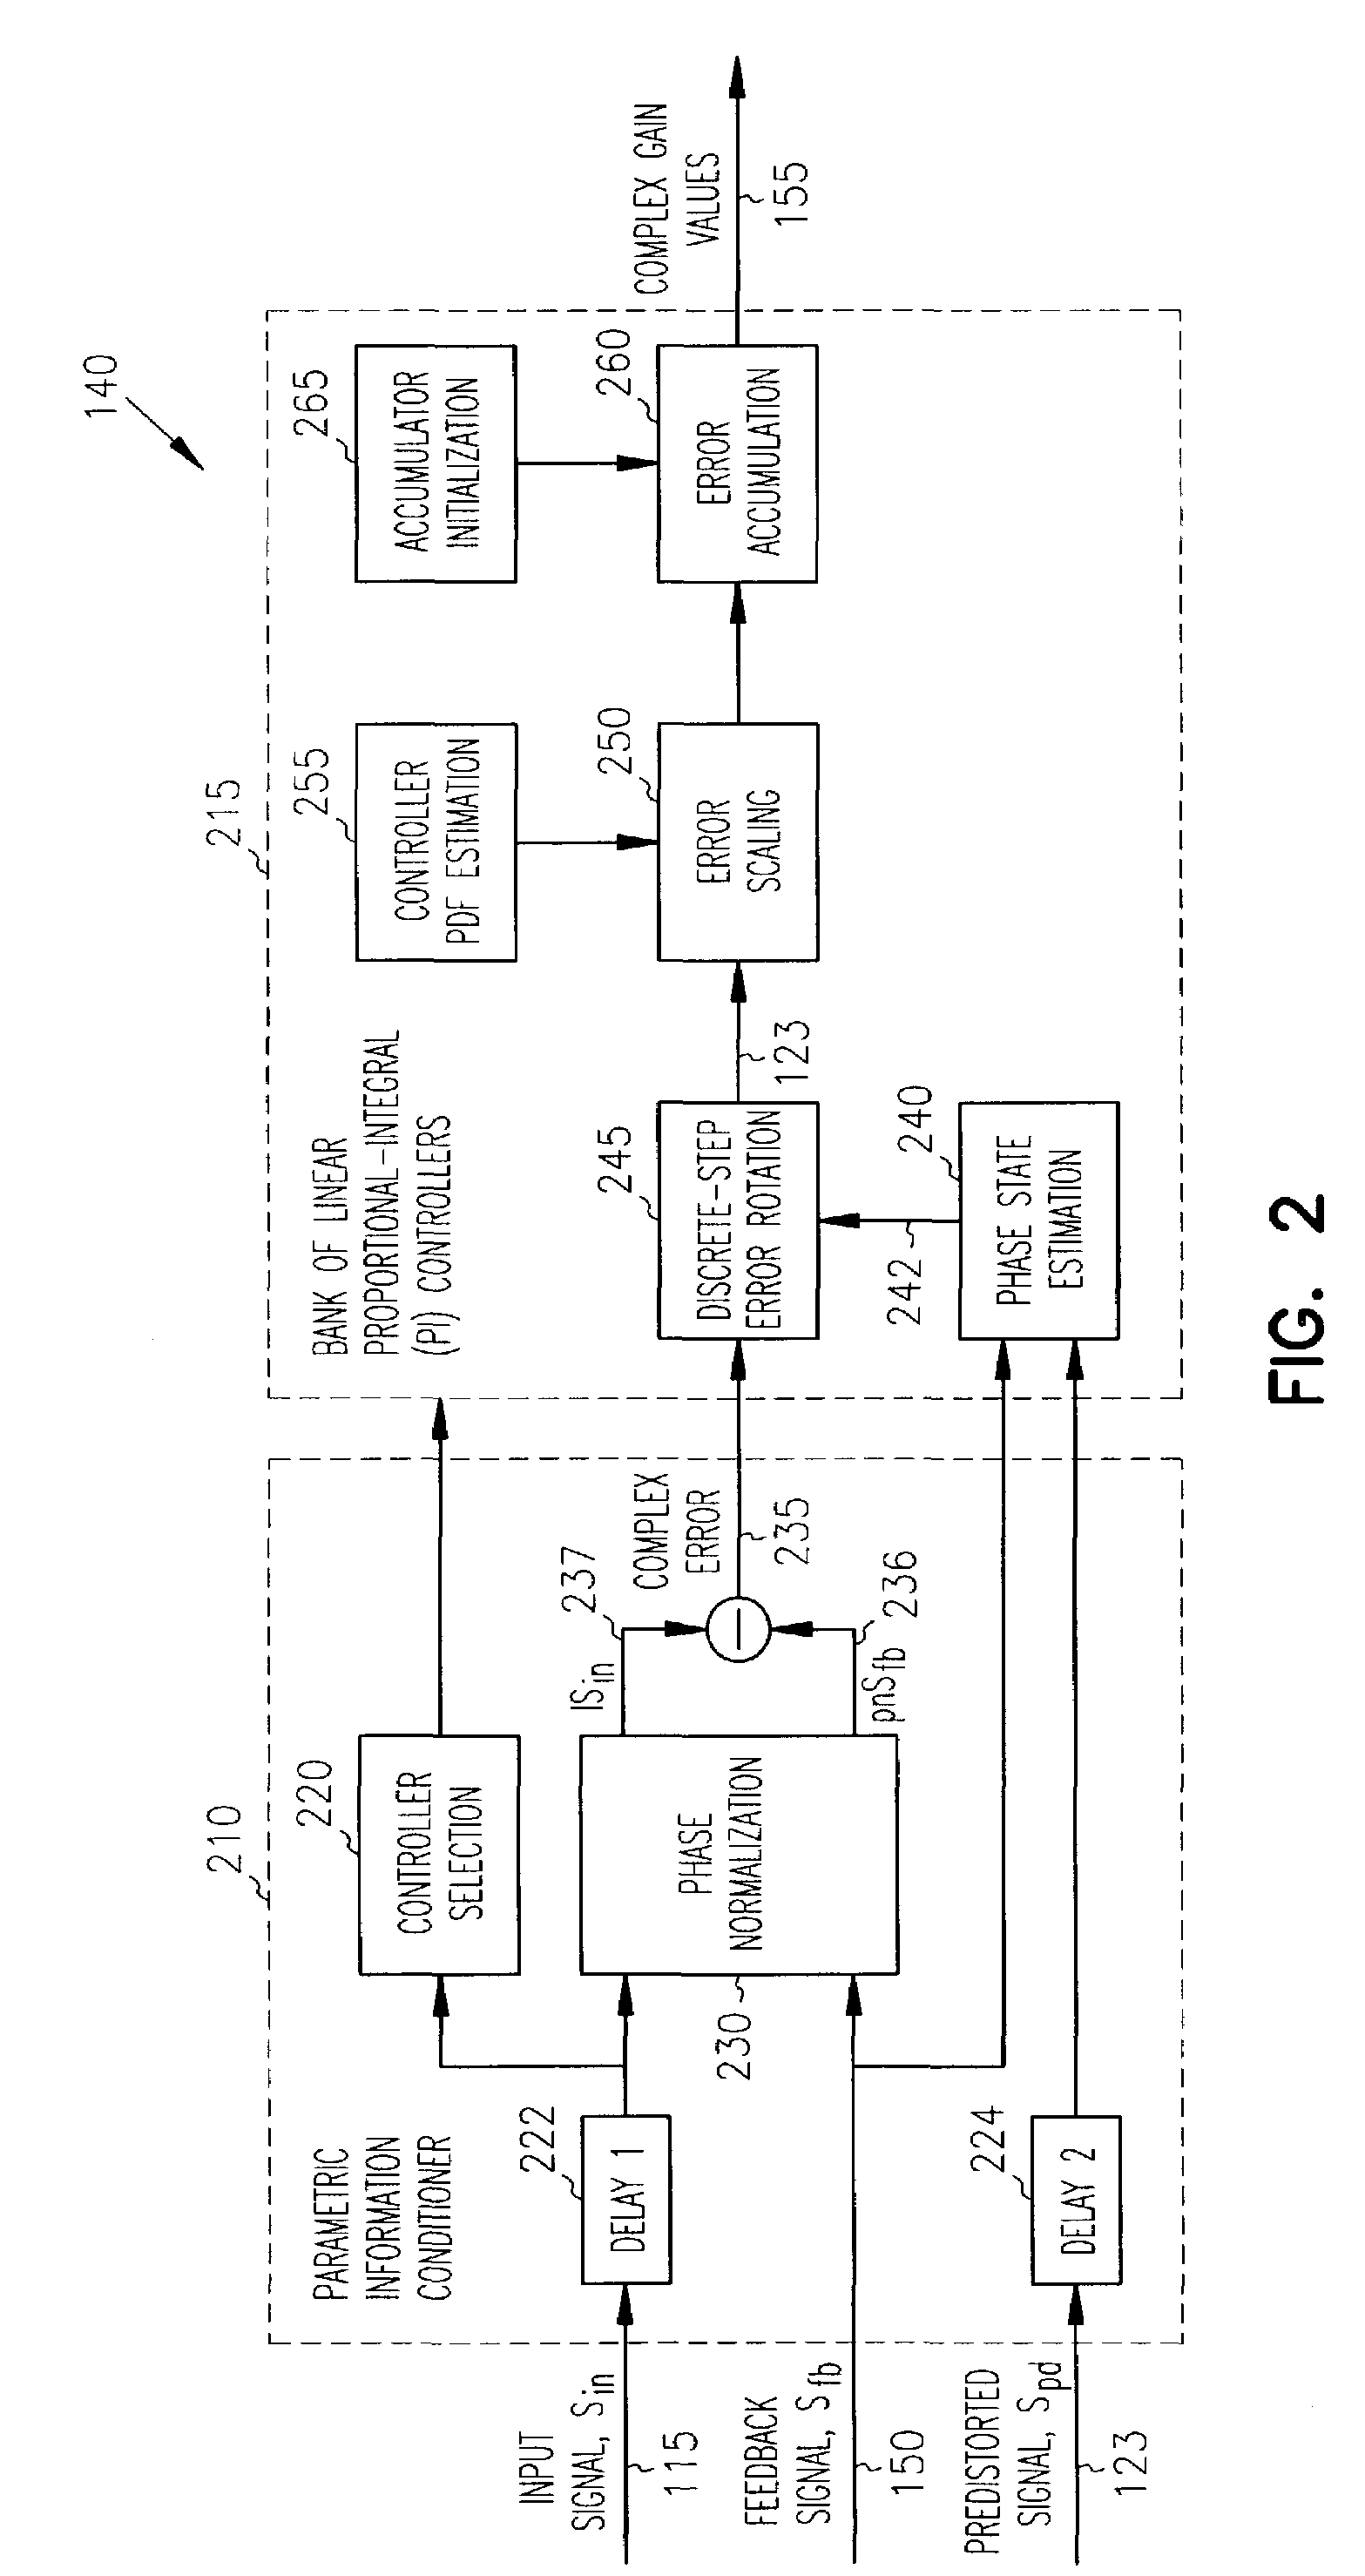 Adaptive controller for linearization of transmitter